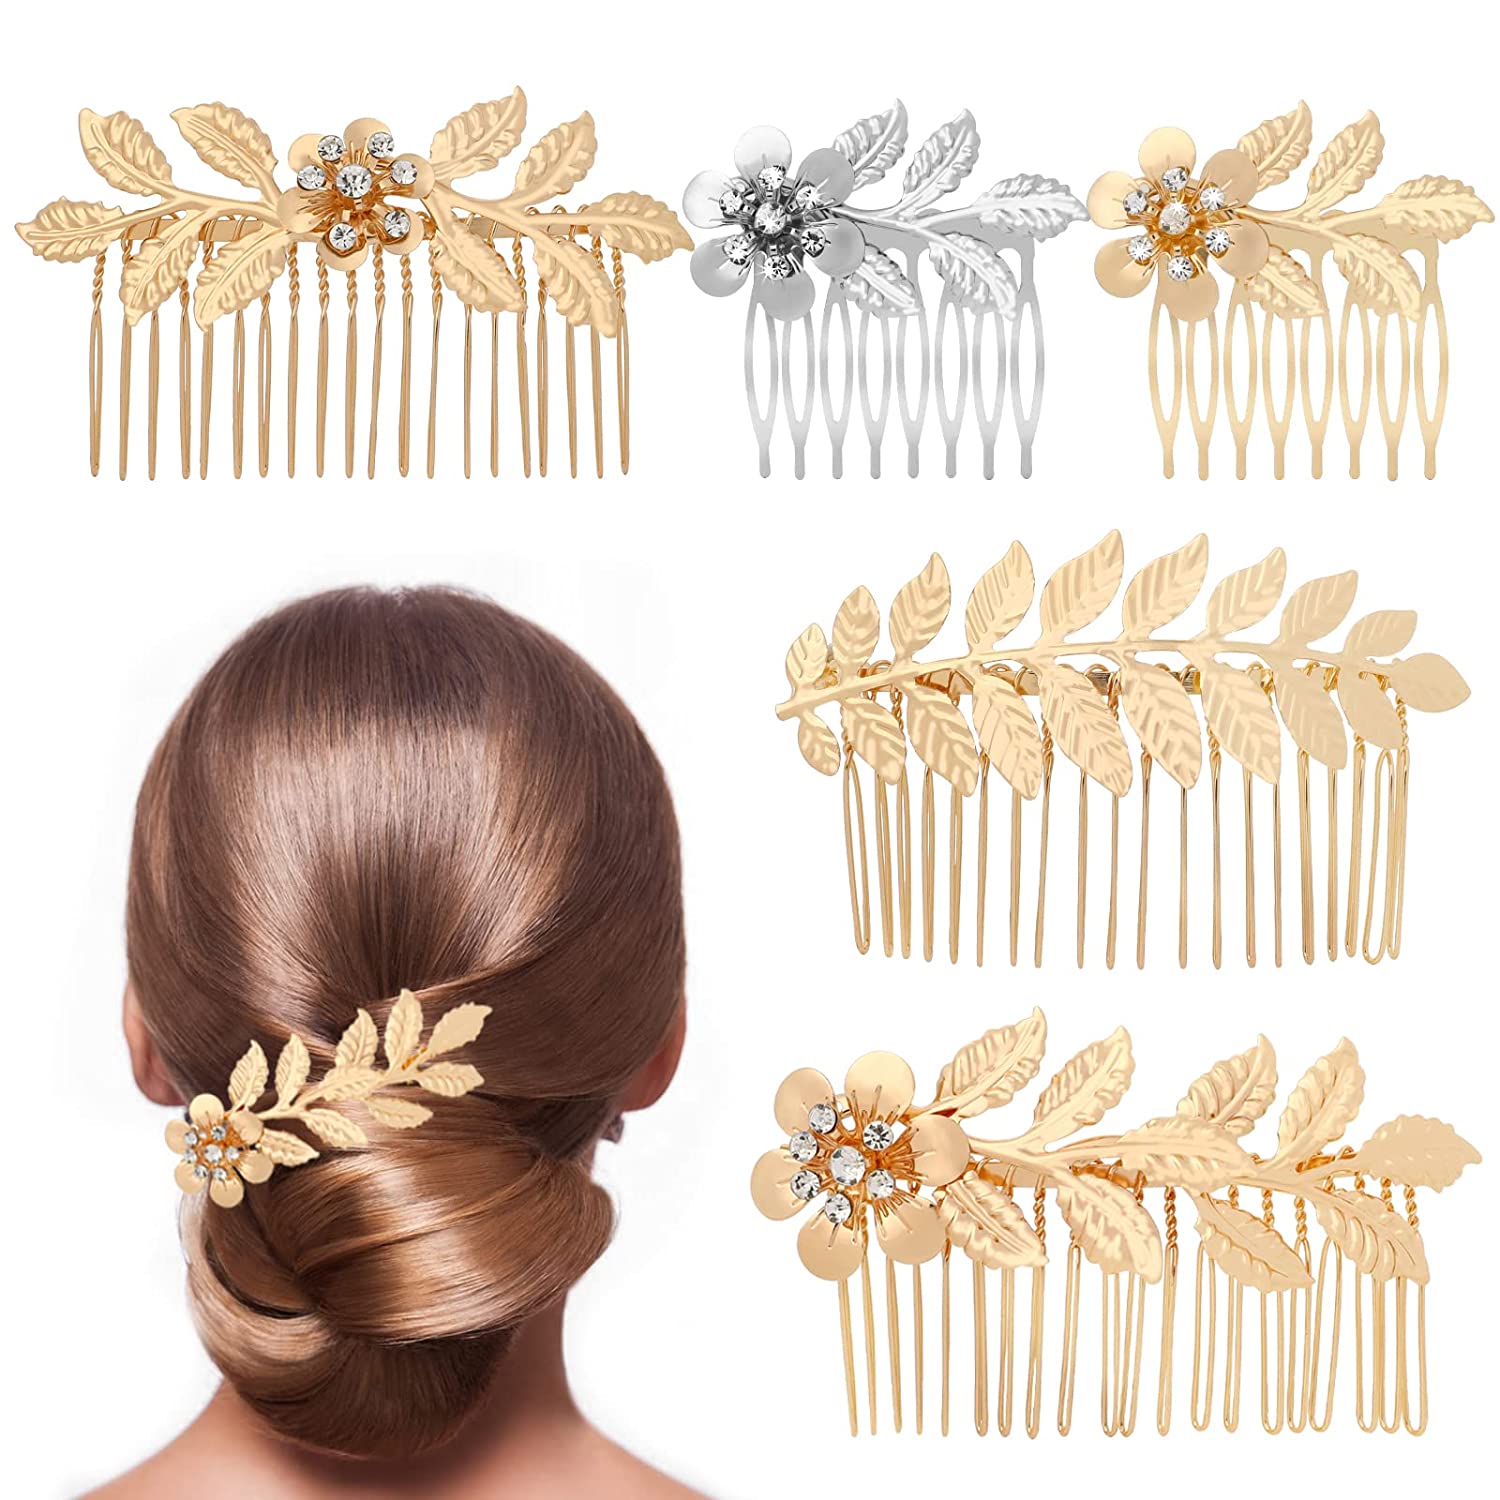 sliverdew 5pcs Bridal Jewelry Barrette Comb Alloy Rhinestone Hair Side Comb Vintage Hair Side Combs Wedding Hair Comb Hair Accessories Gold Ladies Hair Comb For Bridal Wedding Headgear Hair Accessories